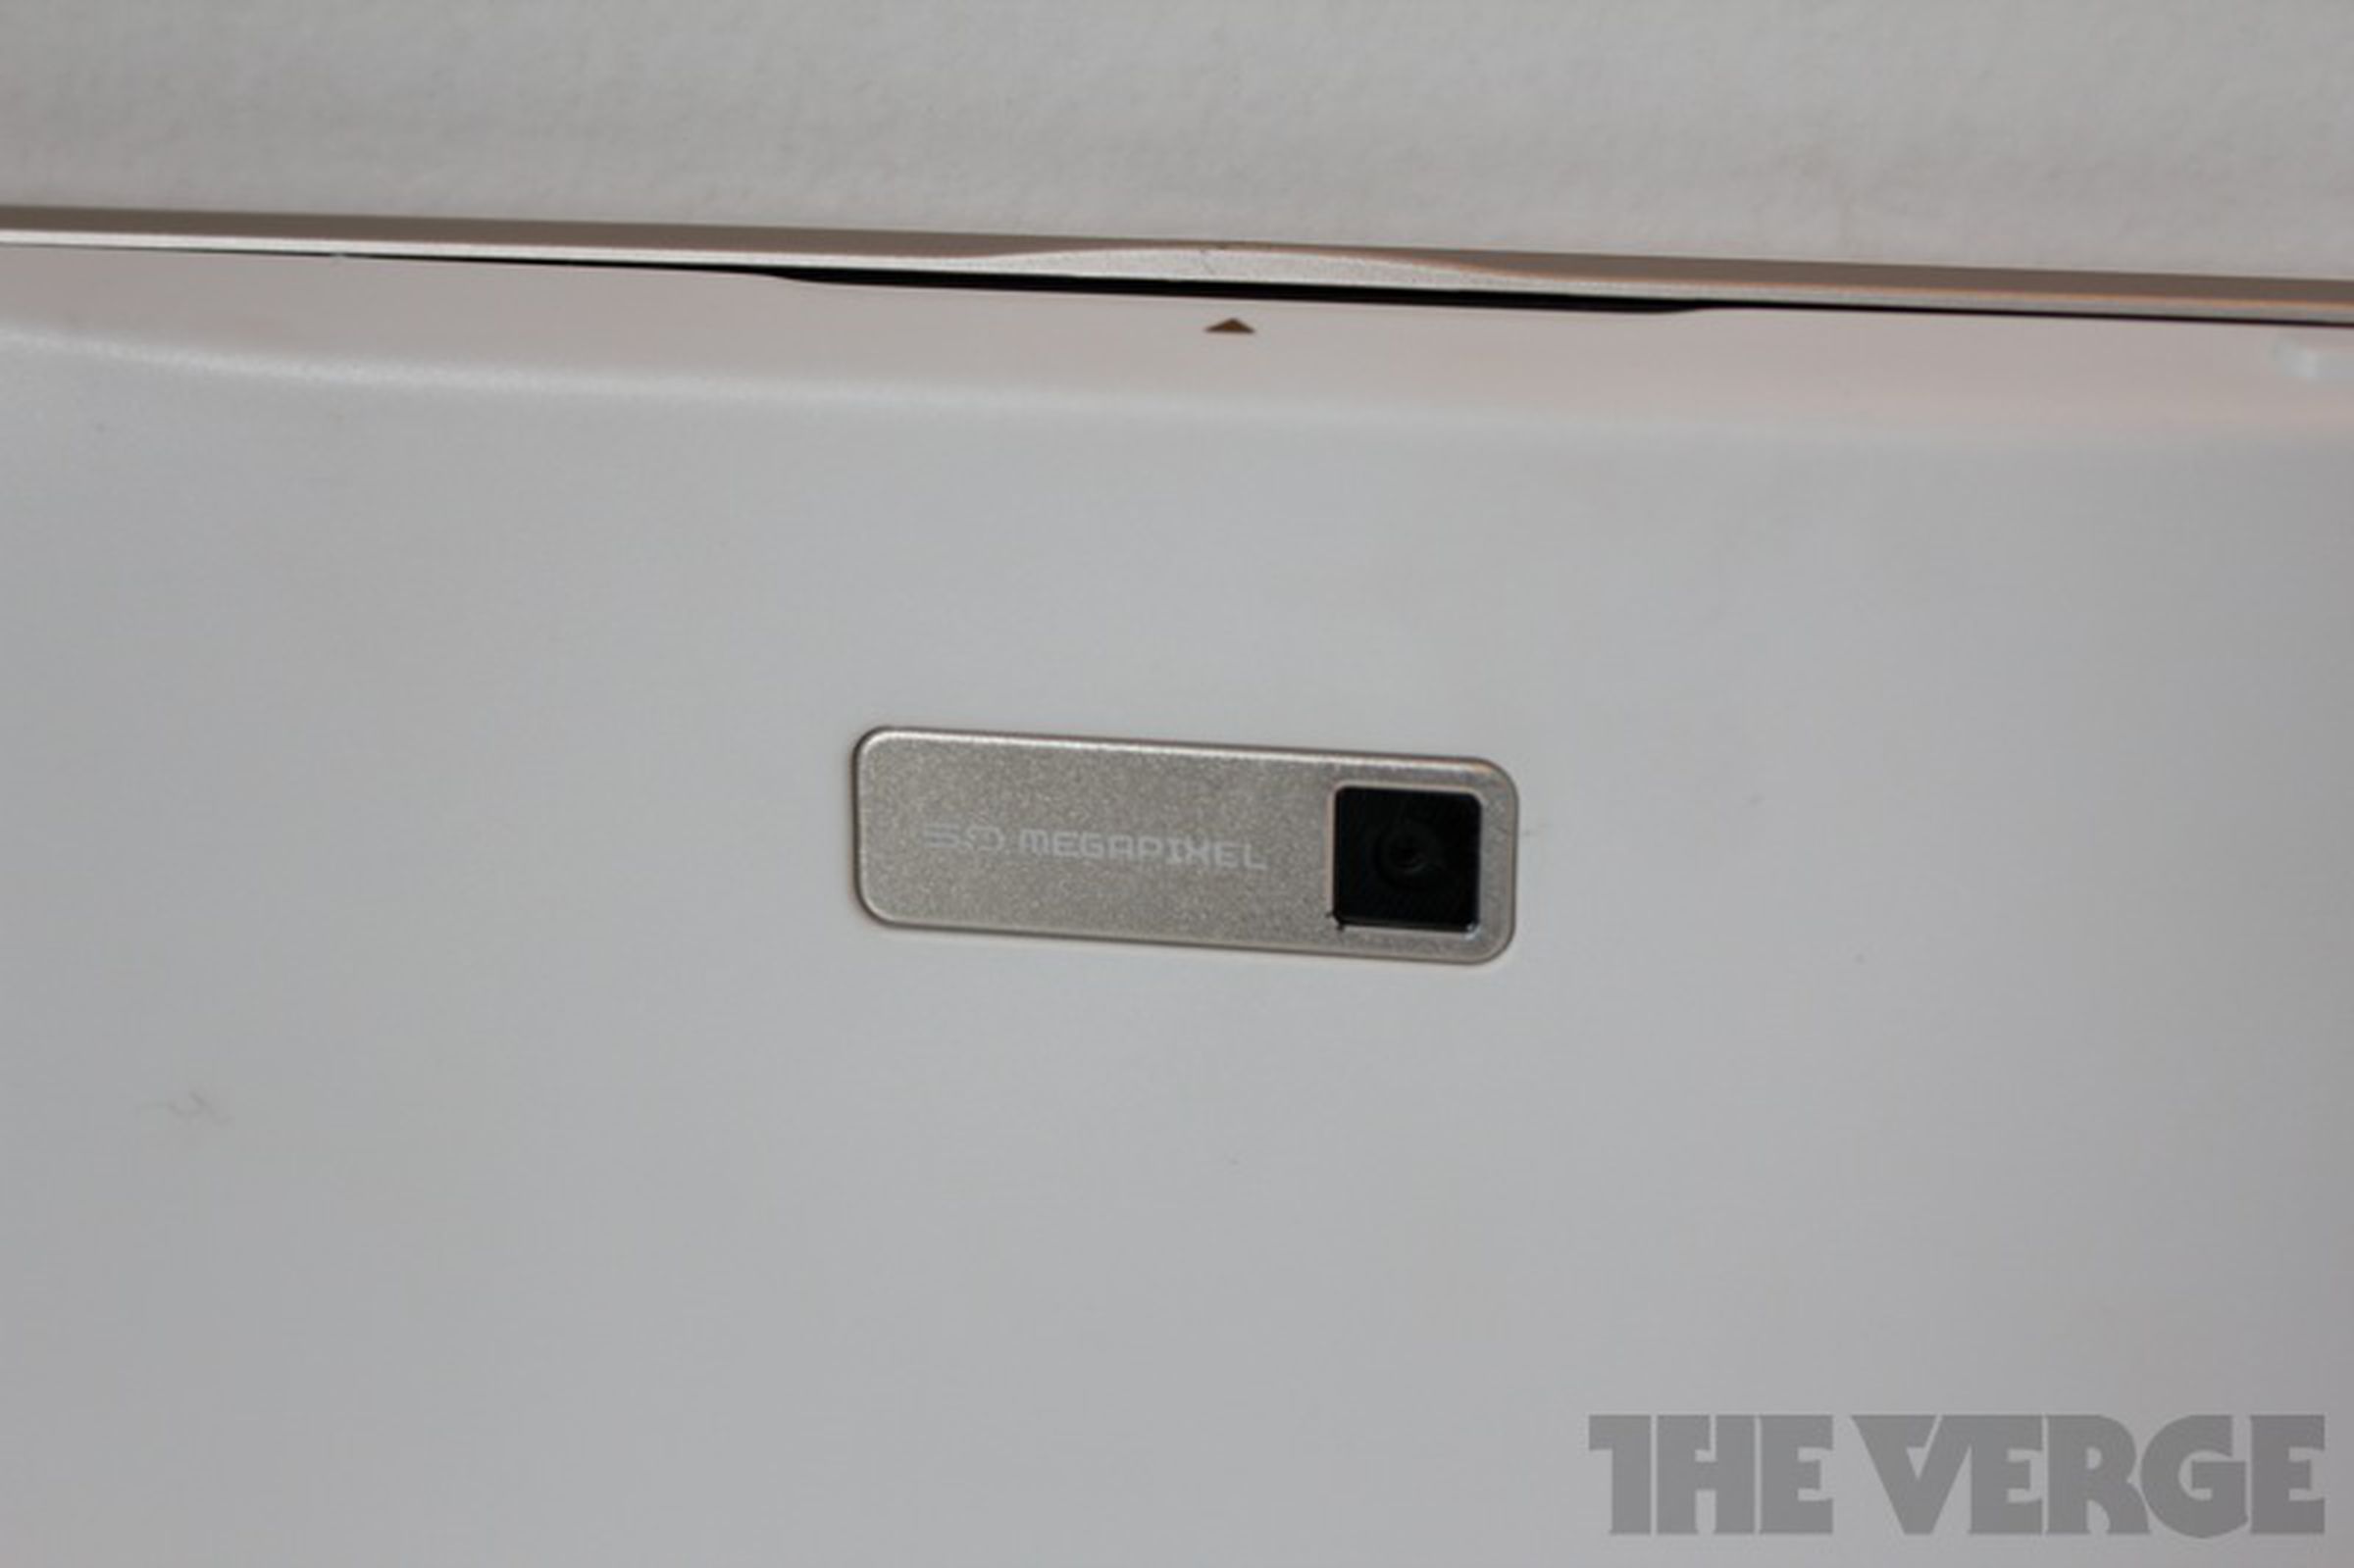 Asus Eee Pad Slider SL101 review pictures